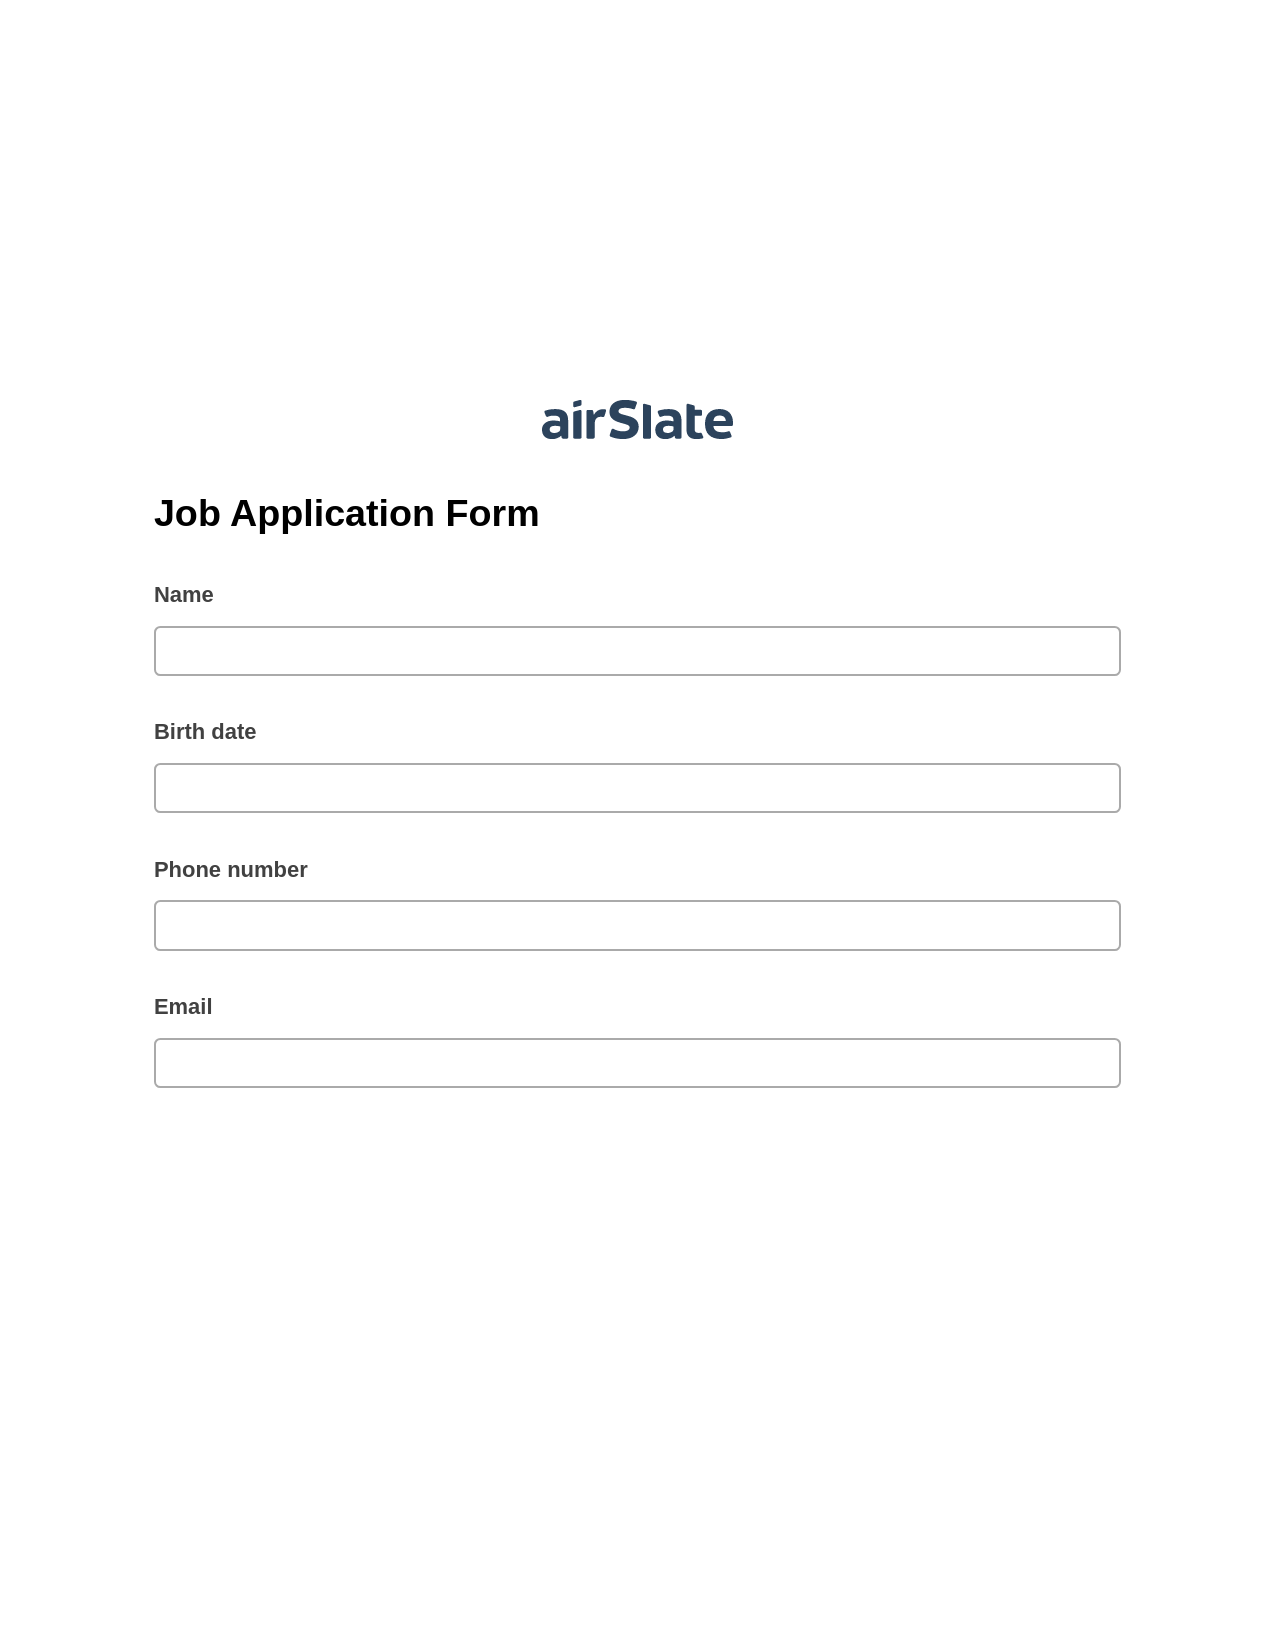 Multirole Job Application Form Pre-fill from Excel Spreadsheet Bot, System Bot - Create a Slate in another Flow, Export to NetSuite Record Bot